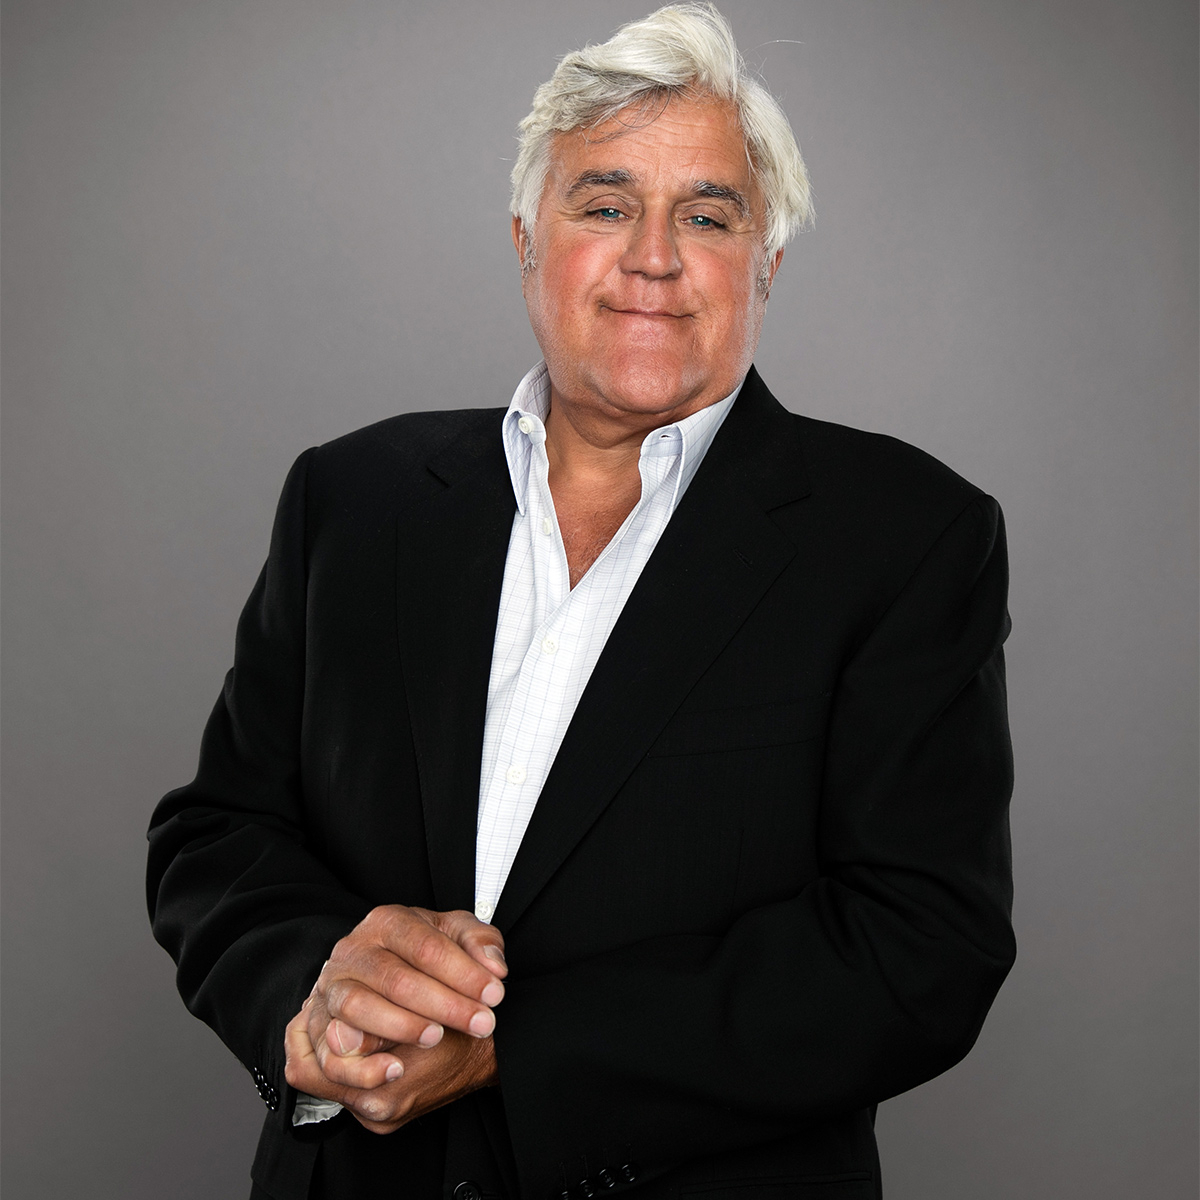 Jay Leno Partners With Direct Connection For New Car Care Line -  MoparInsiders